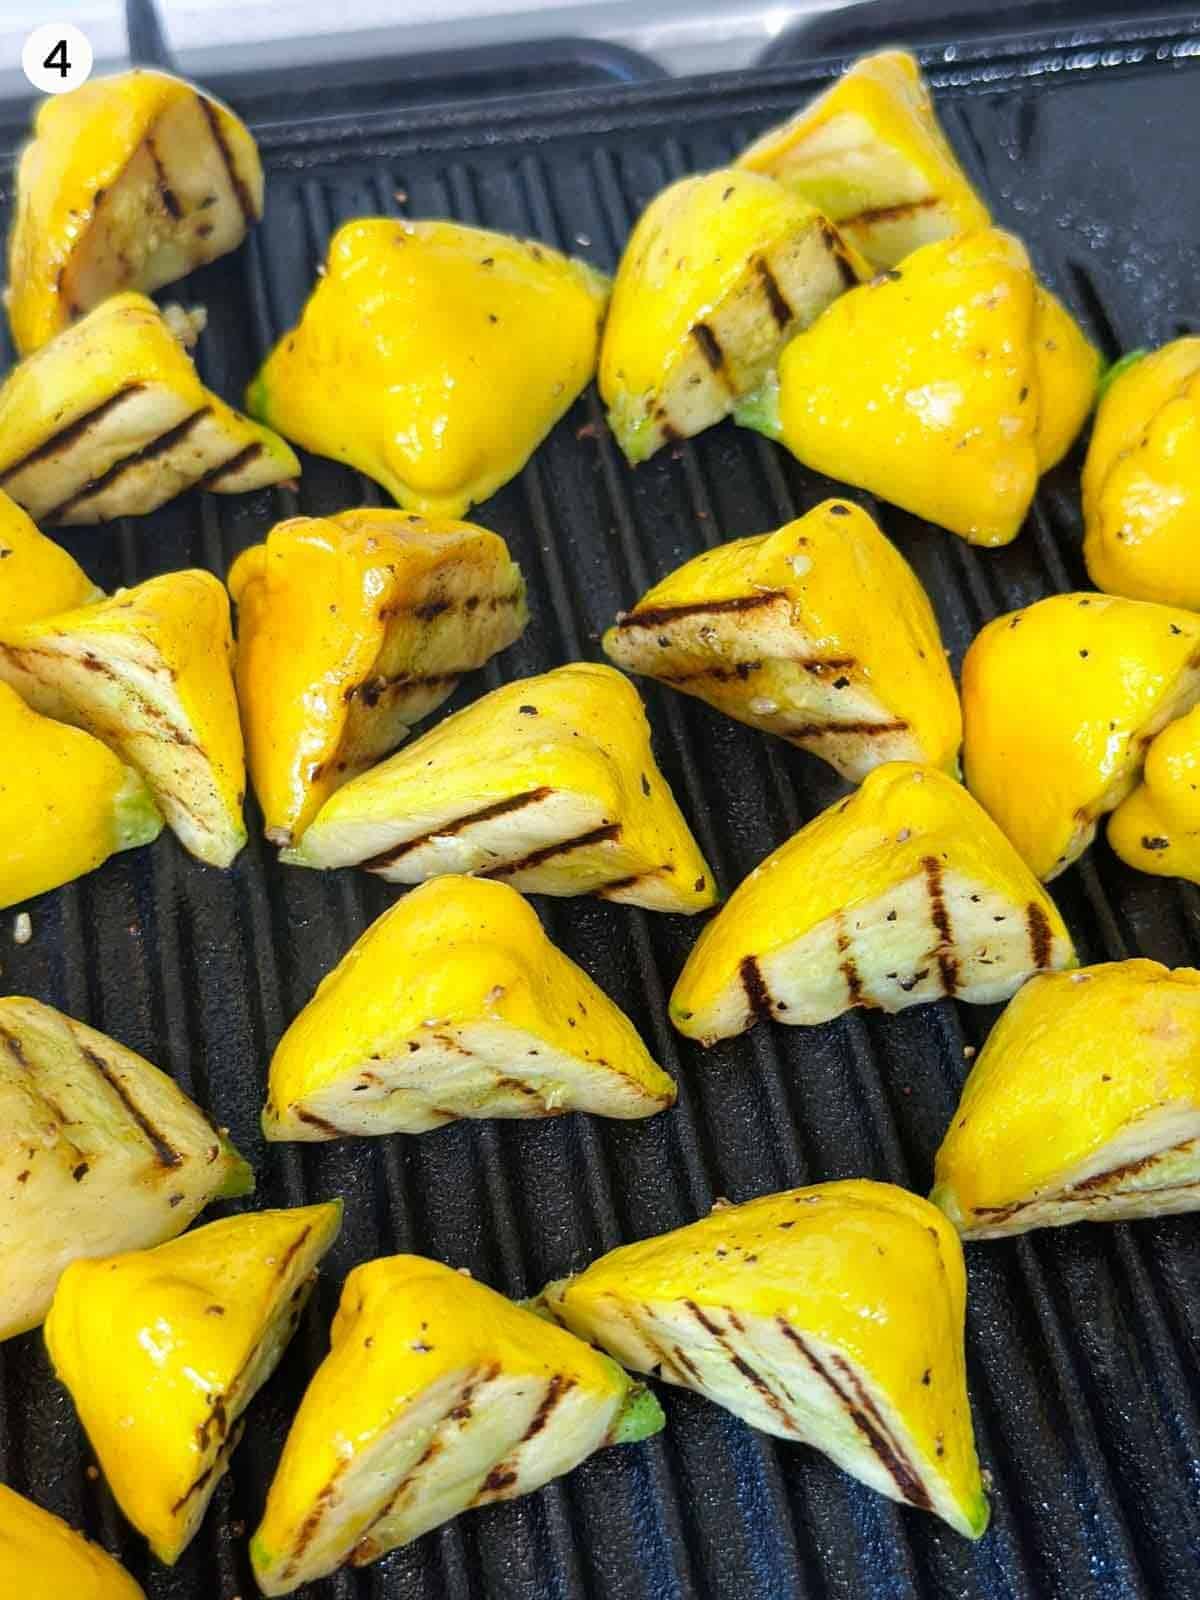 Grilling patty pan squash on a grill plate